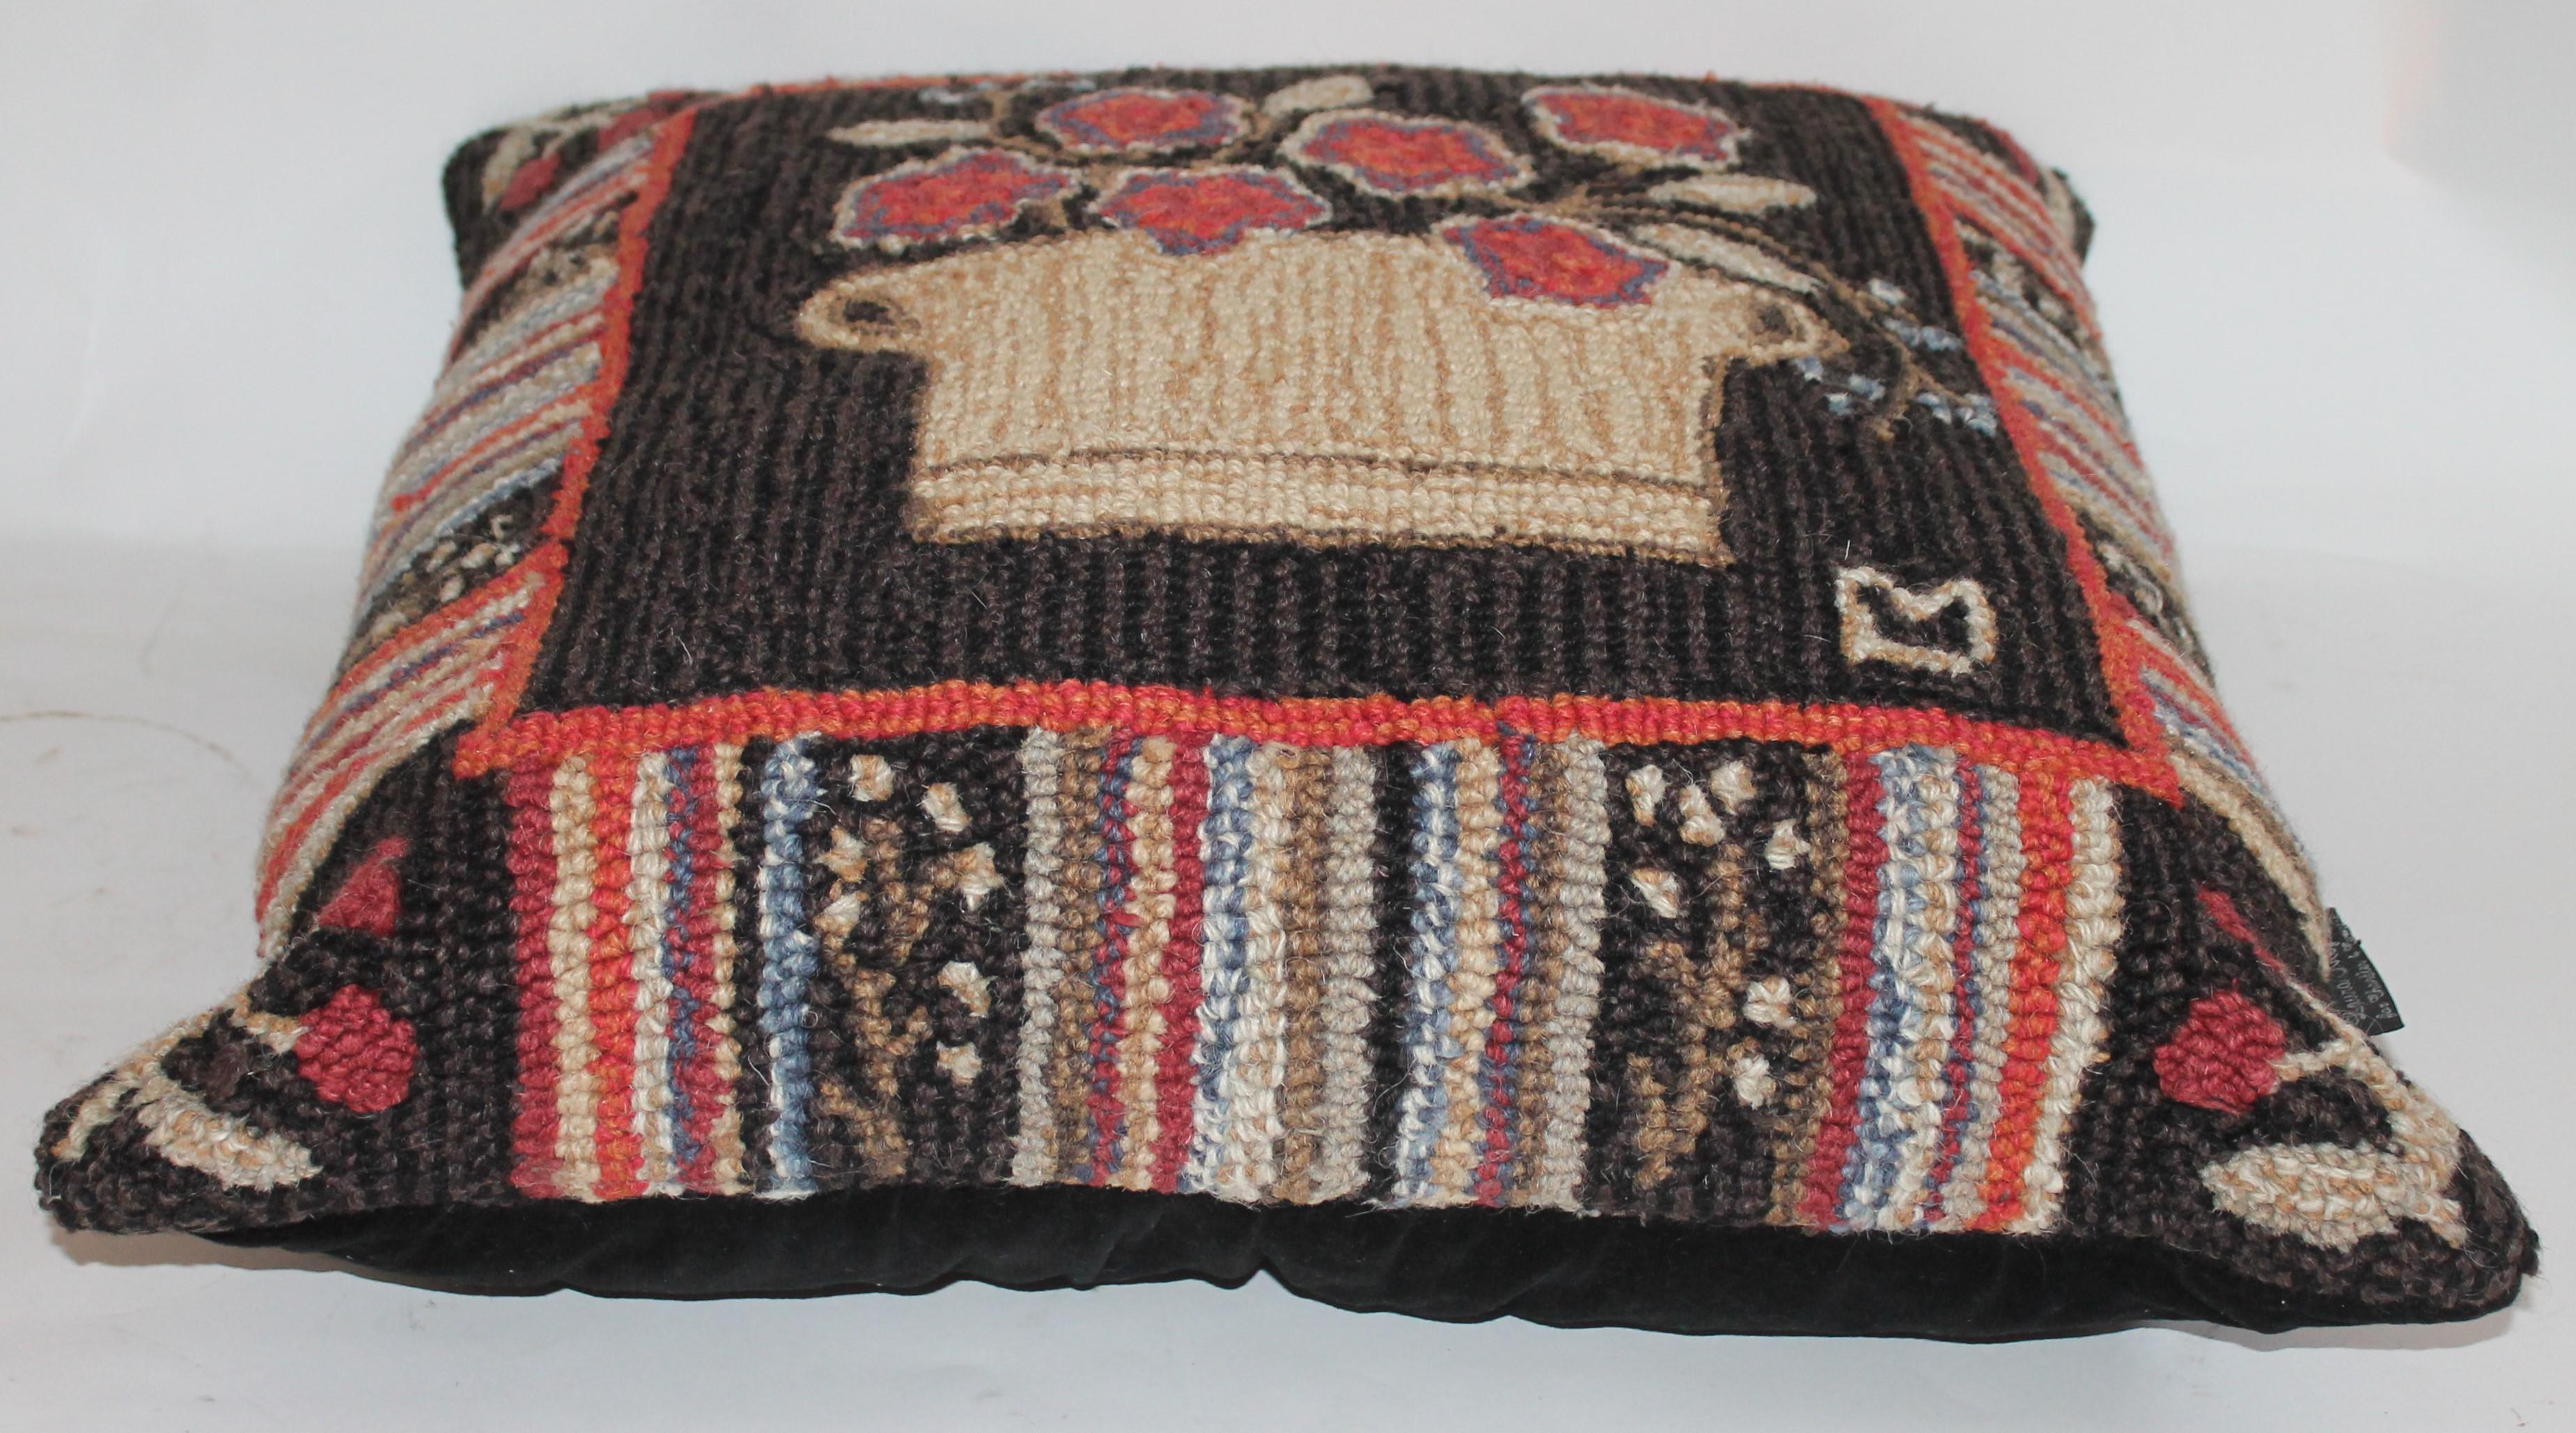 Replica of a 19th century hand woven rug that was sold in a New York auction for $25,000. This item has minor wear and age from use. In great used condition. The backing of this modern Folk Art rug pillow is in velvet.